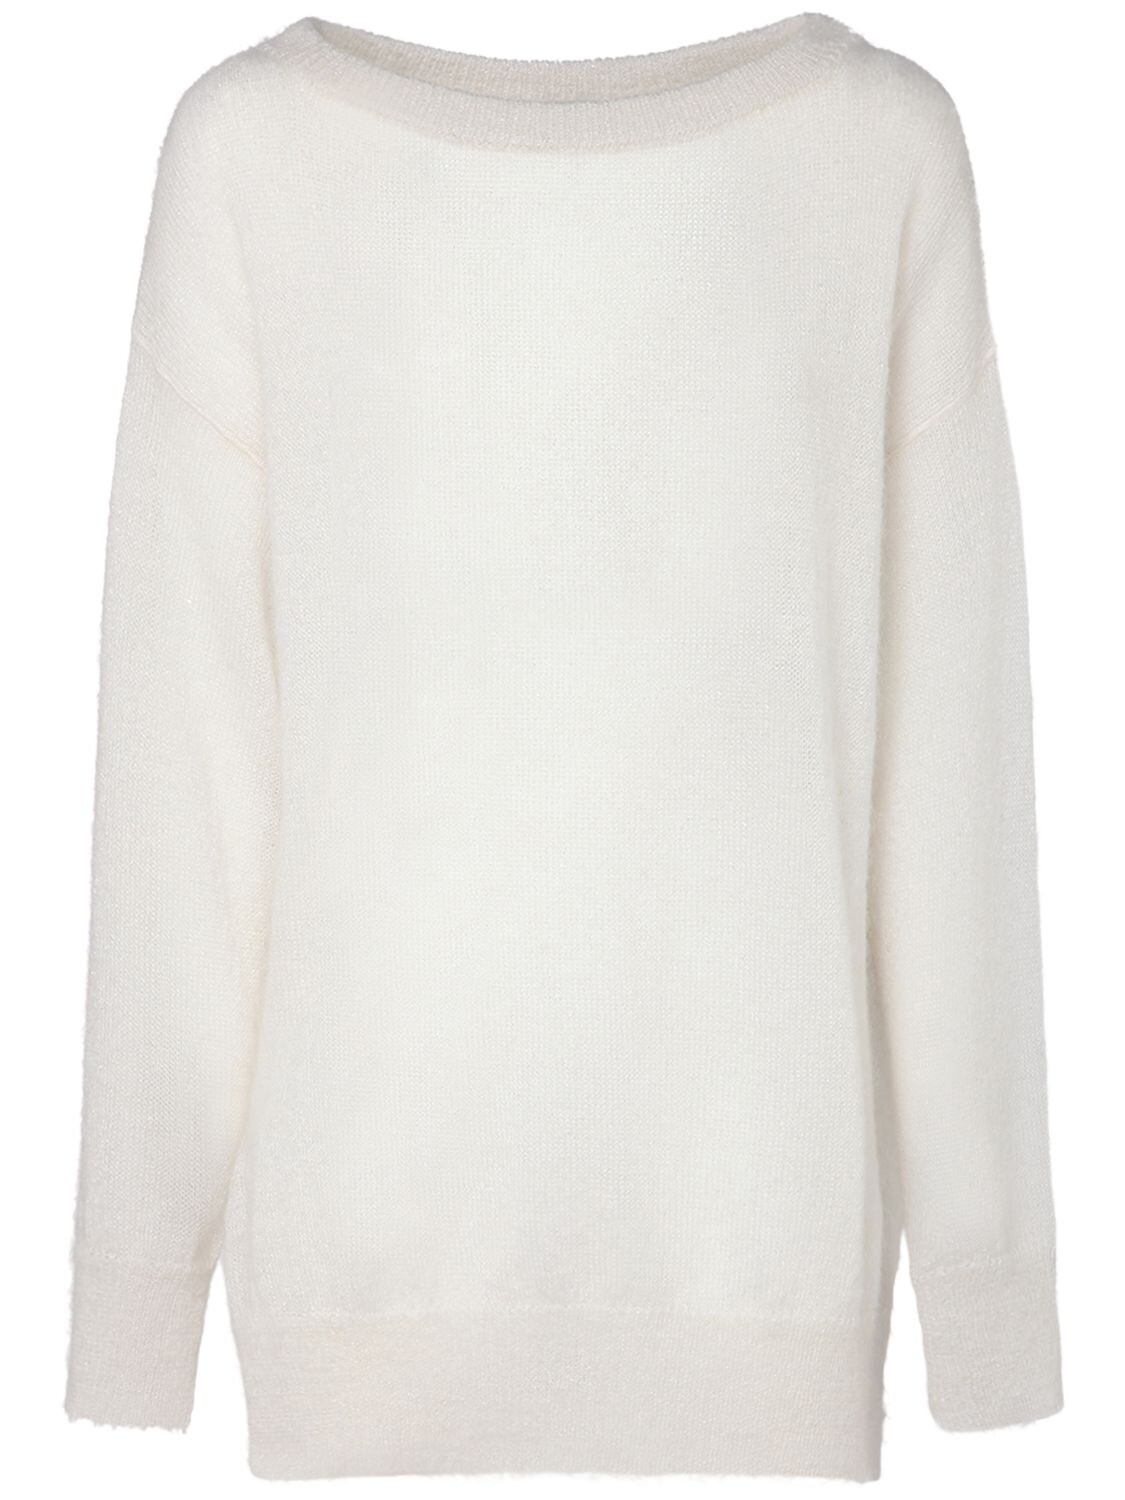 Max Mara Mohair Blend Knit Sweater In White